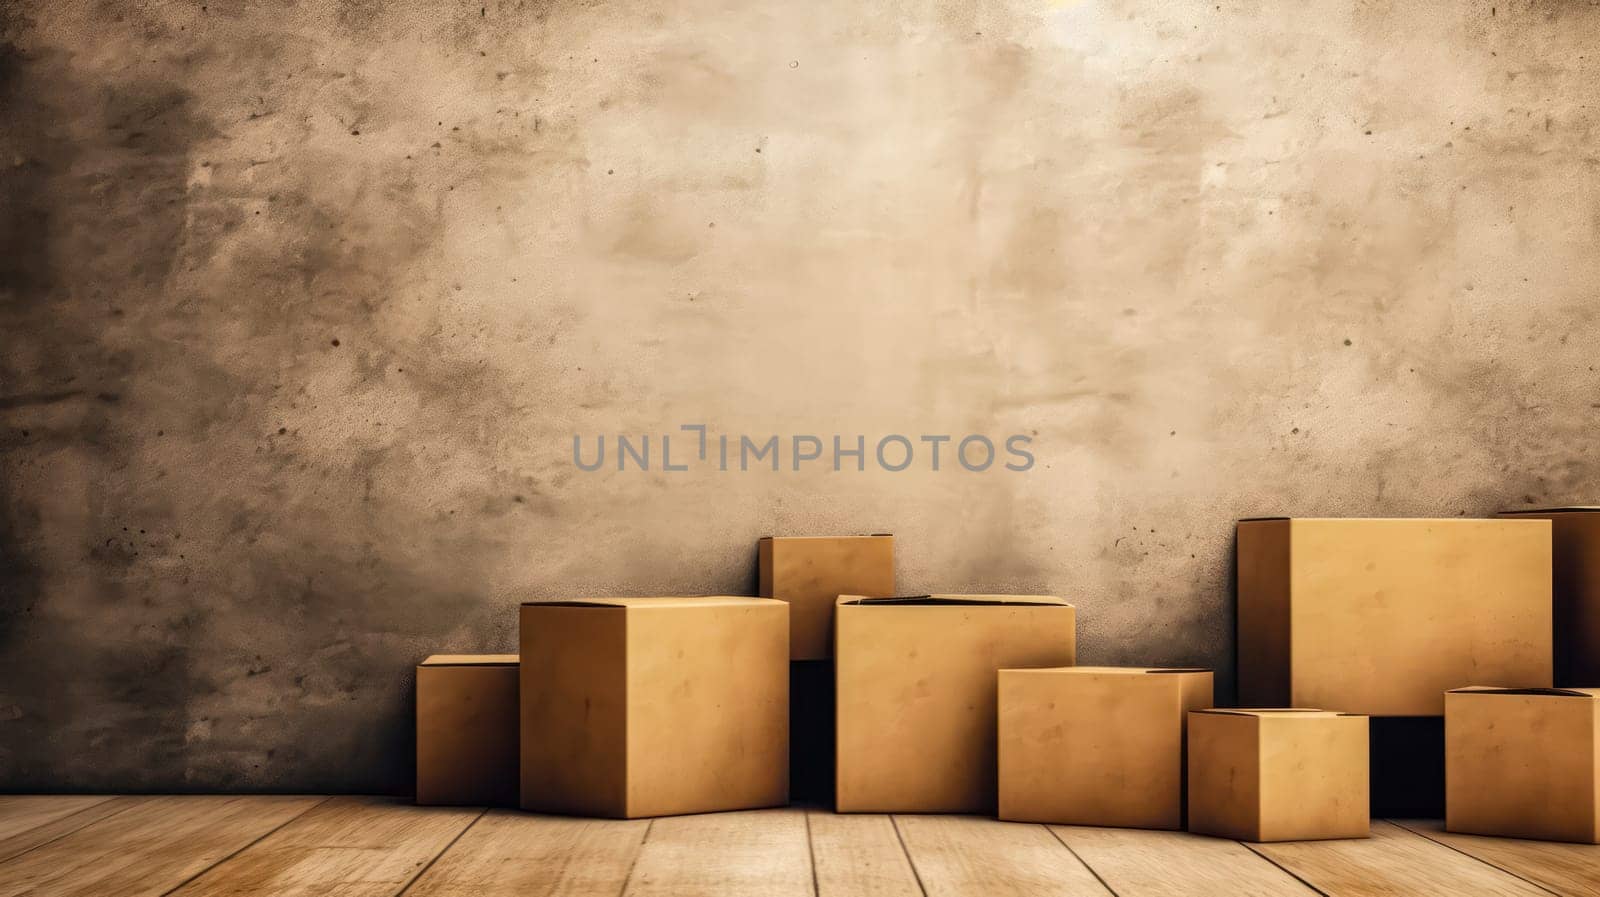 A cardboard box placed on a colored background, providing a simple yet versatile element for various design concepts and projects.